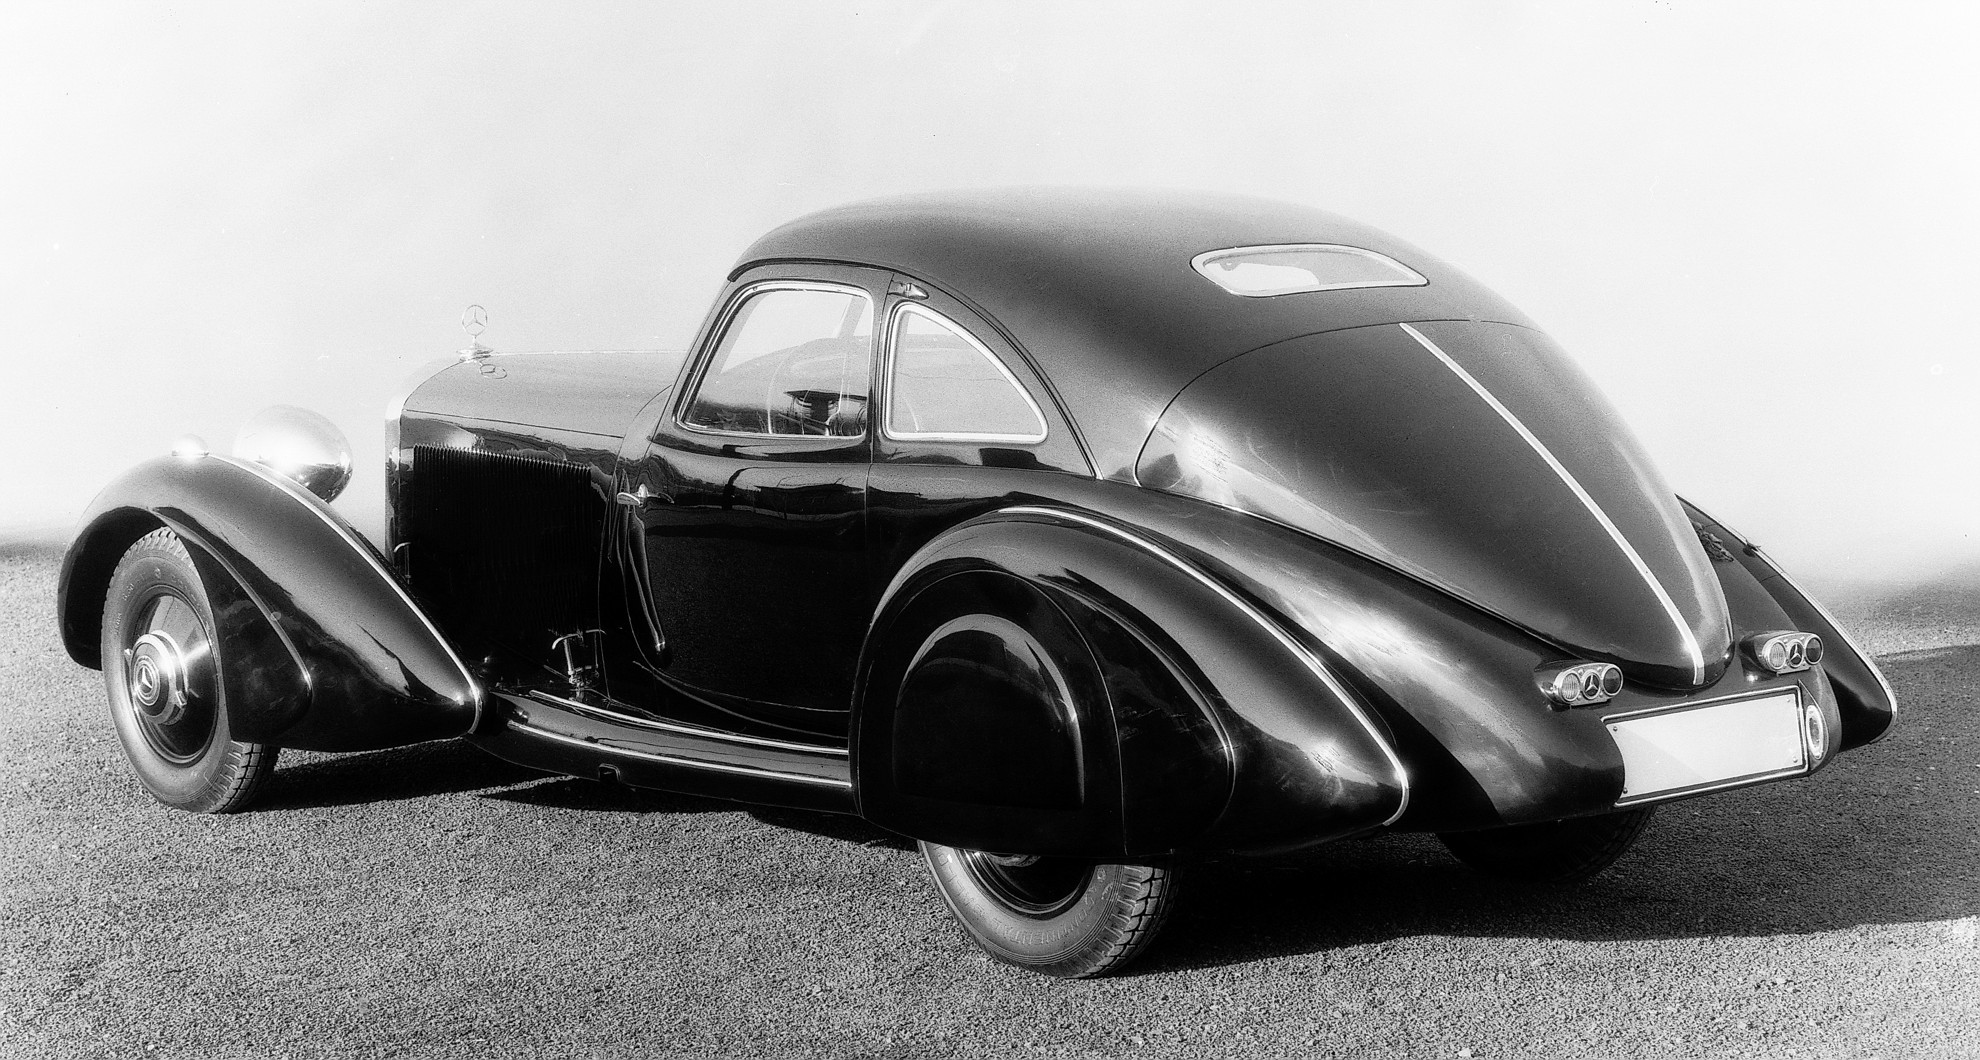 Highlights of the the Mercedes-Benz 540 K Streamliner